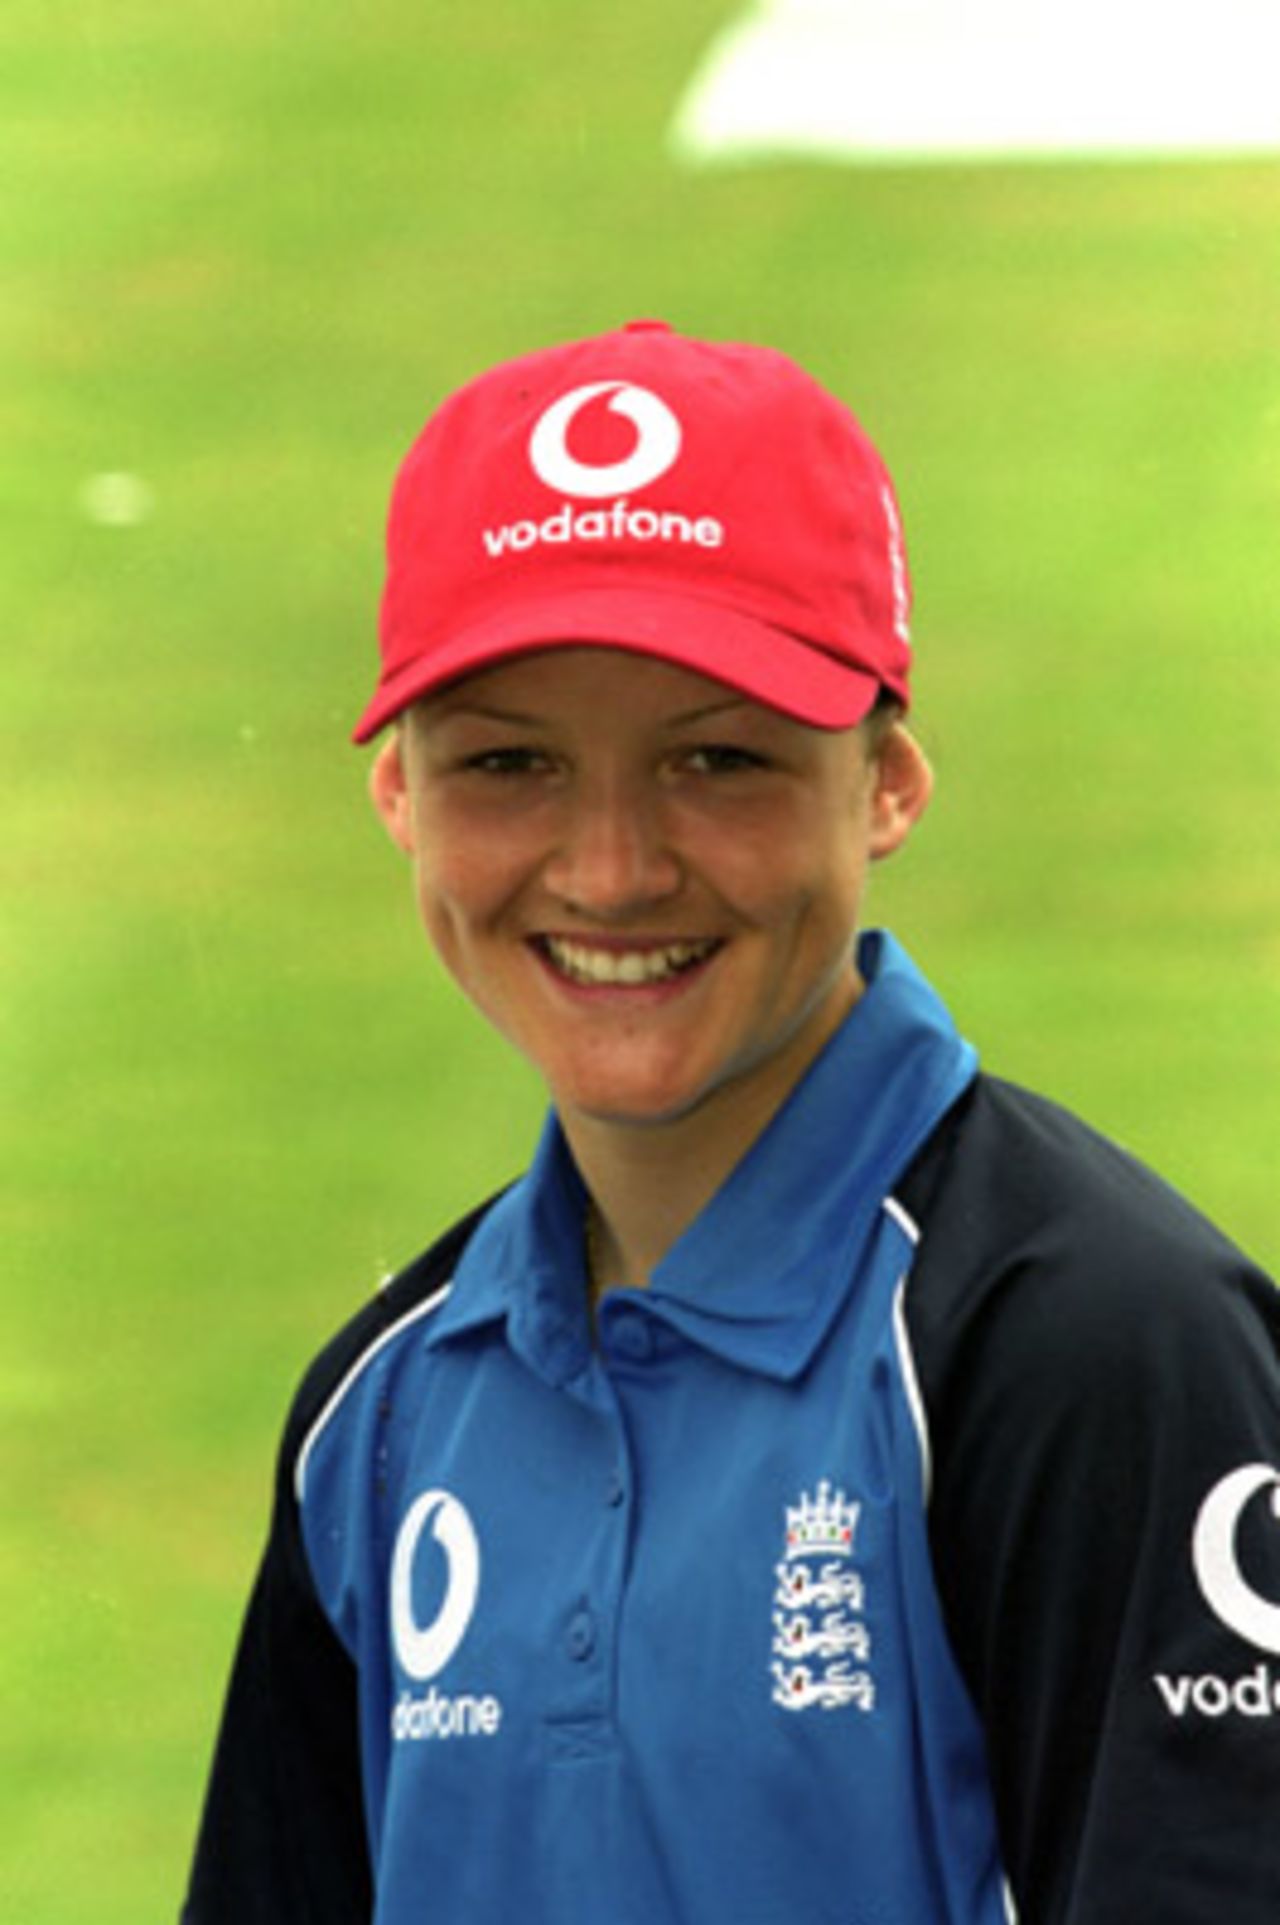 Portrait of Arran Thompson - England player in the CricInfo Women's World Cup 2000